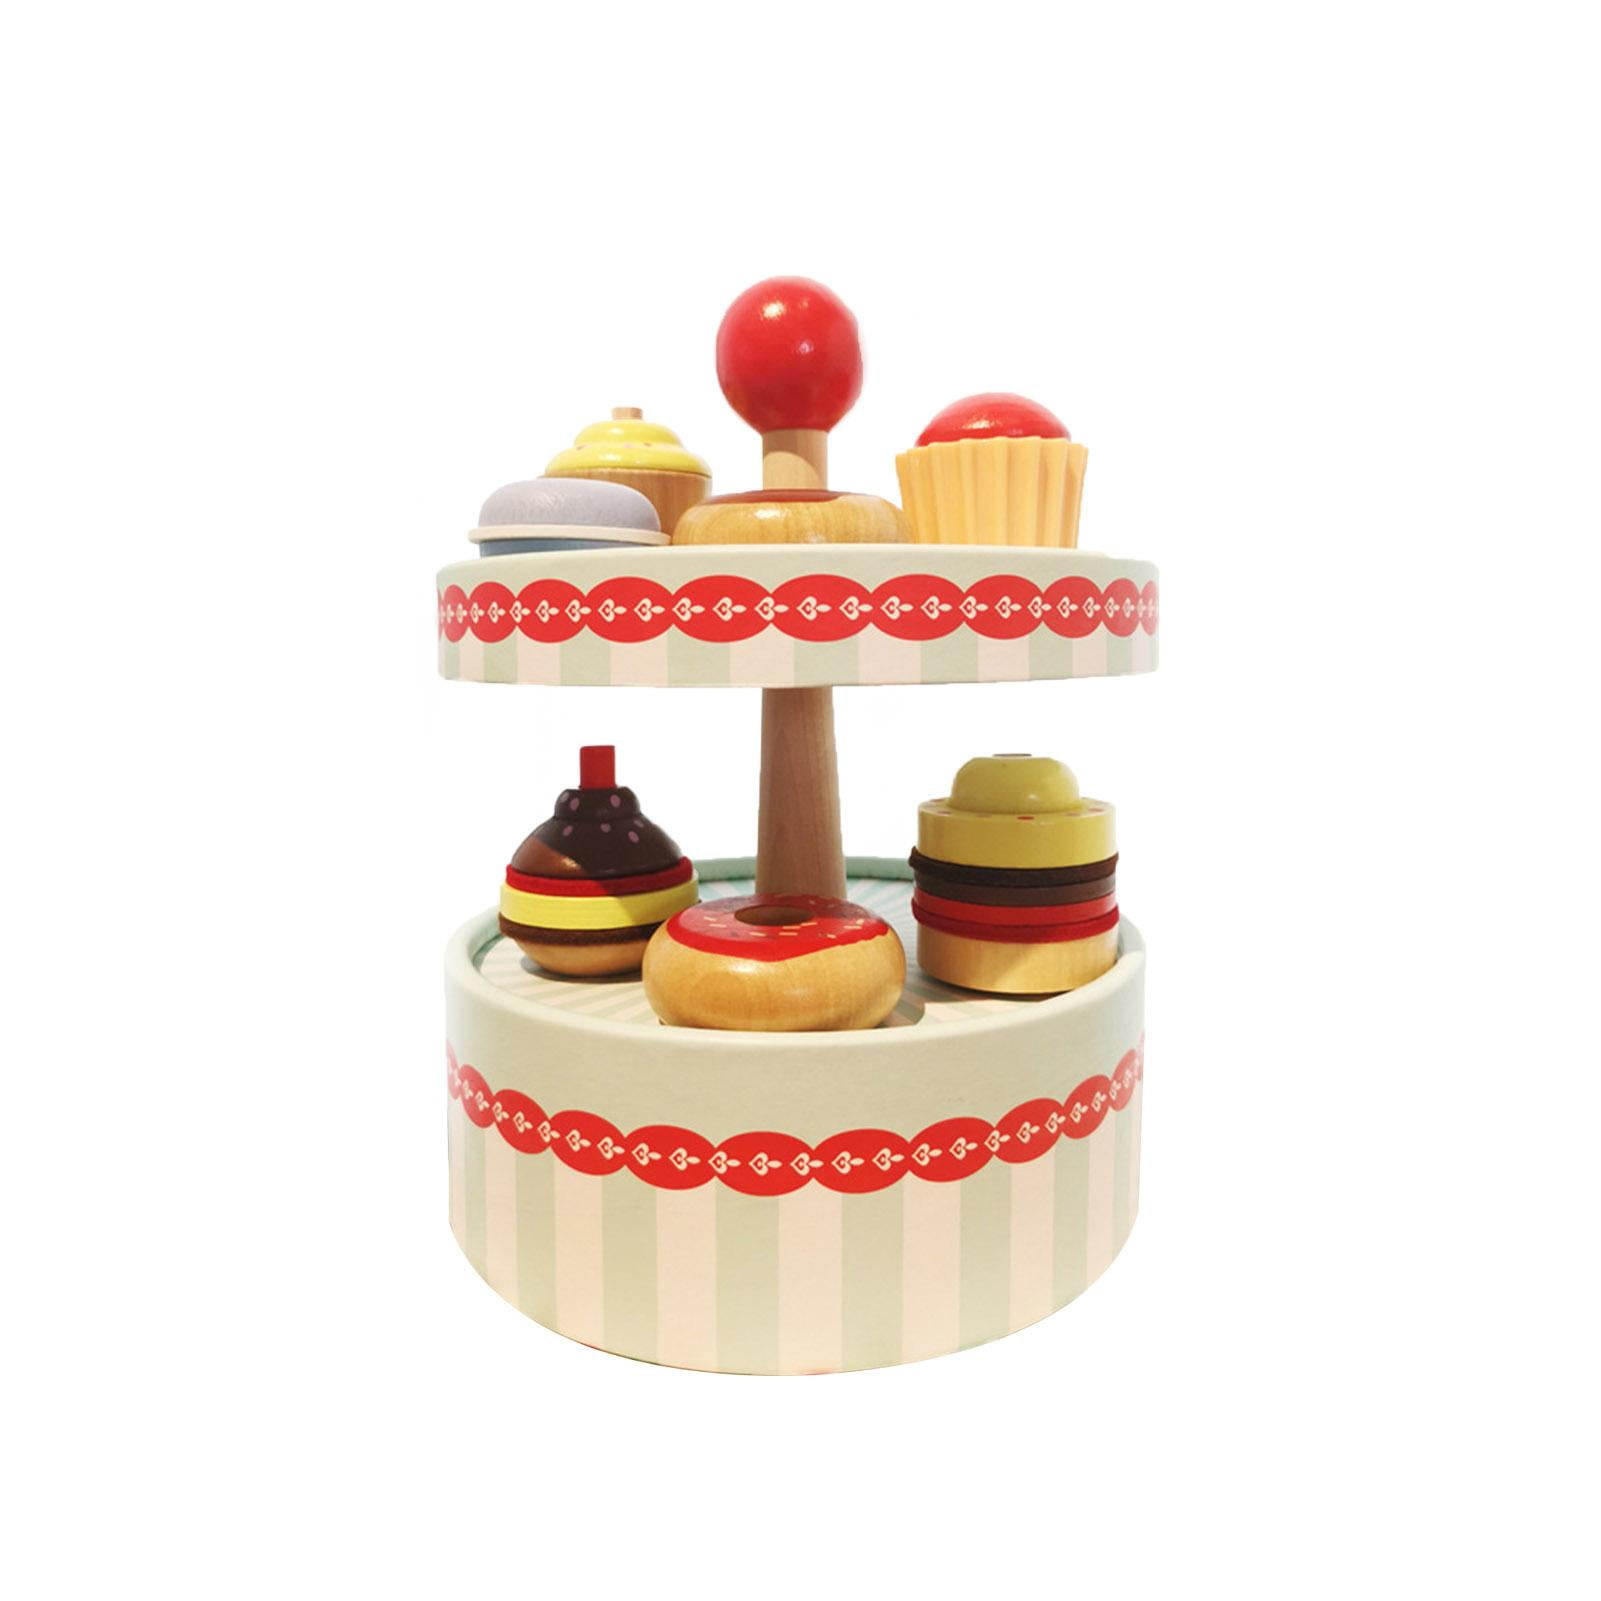 6pcs Kids Play Food Toy Cake Desserts Tower 3-Tier Children Role Play Toys 